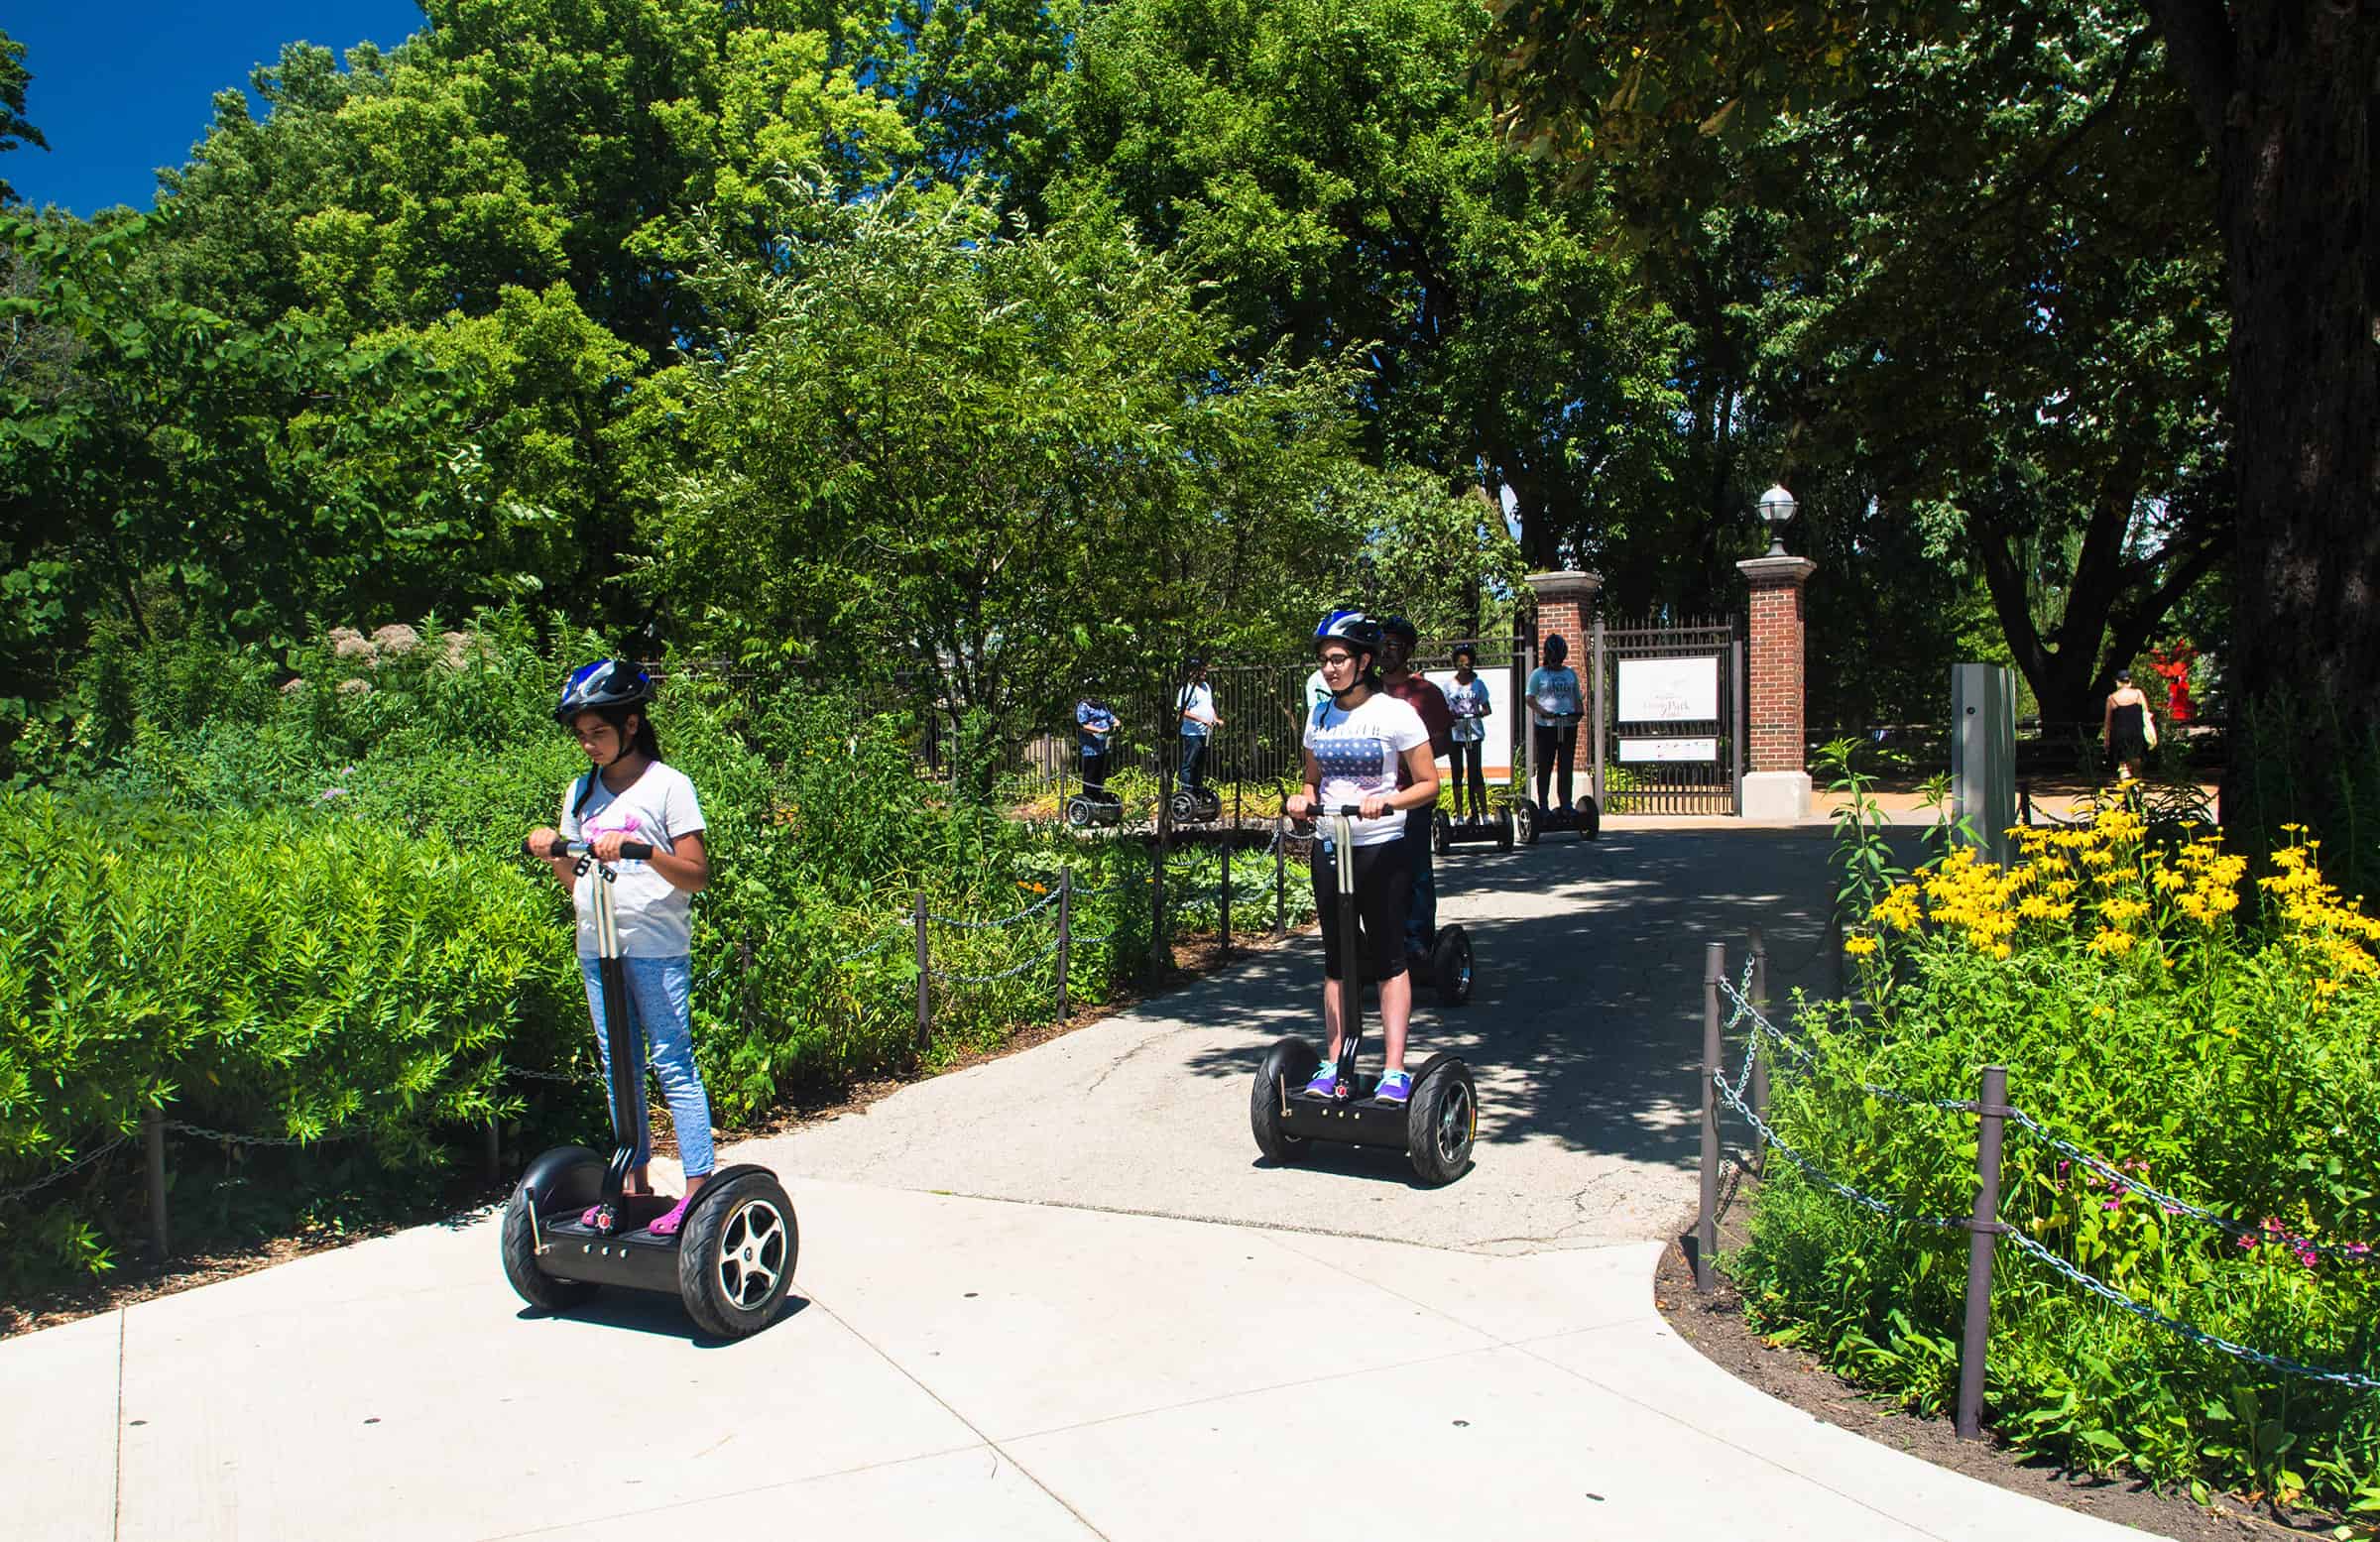 Segway Tour in Chicago